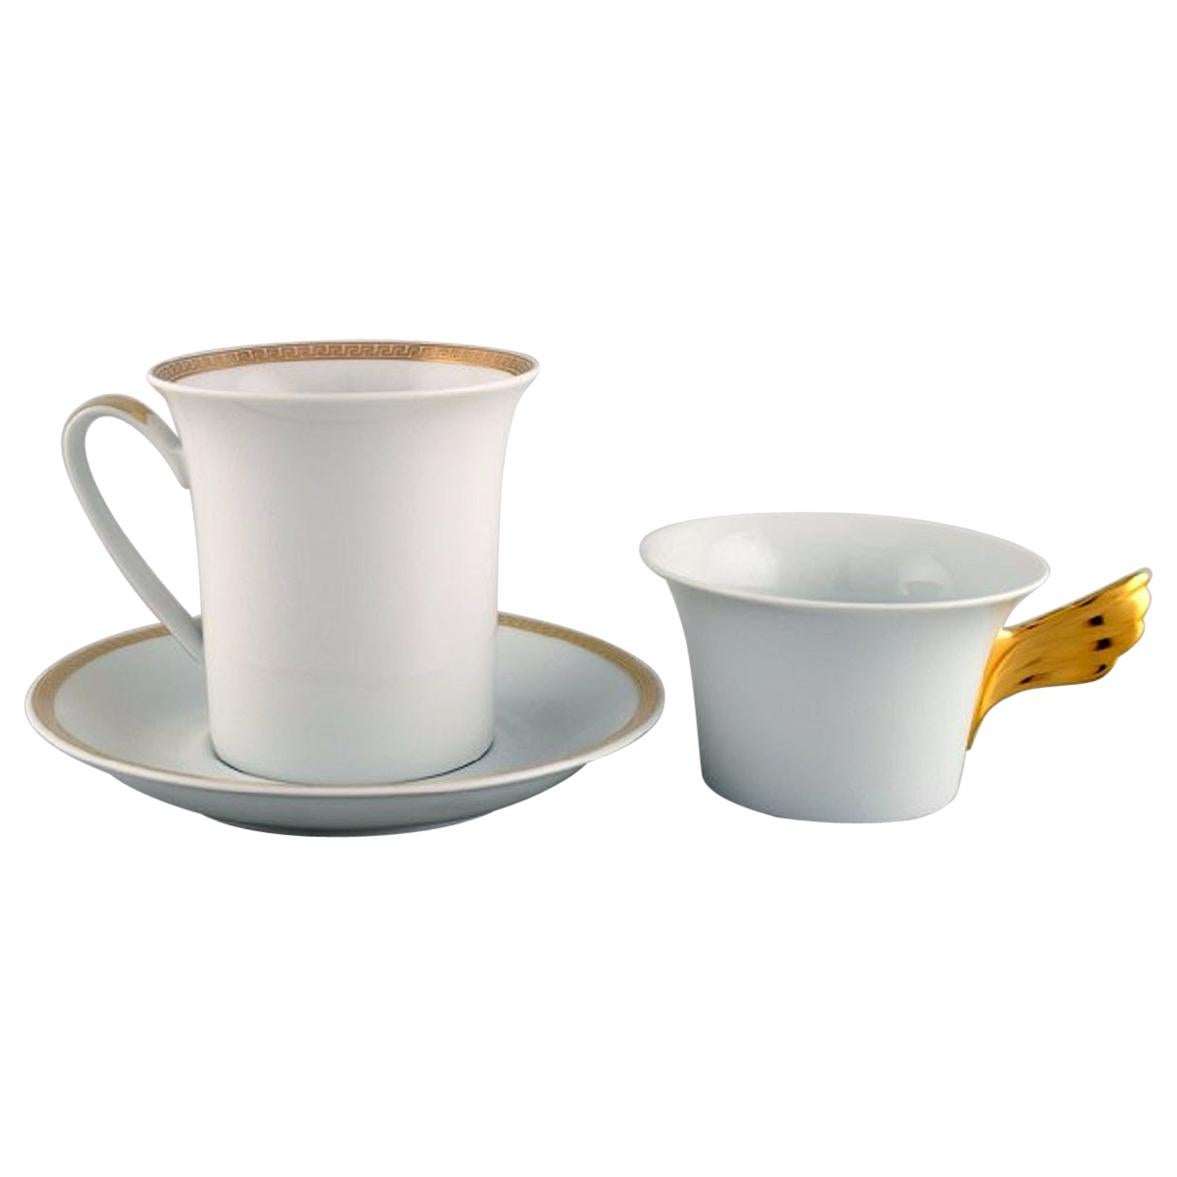 Gianni Versace for Rosenthal, Two Cups in White Porcelain with Gold Decoration